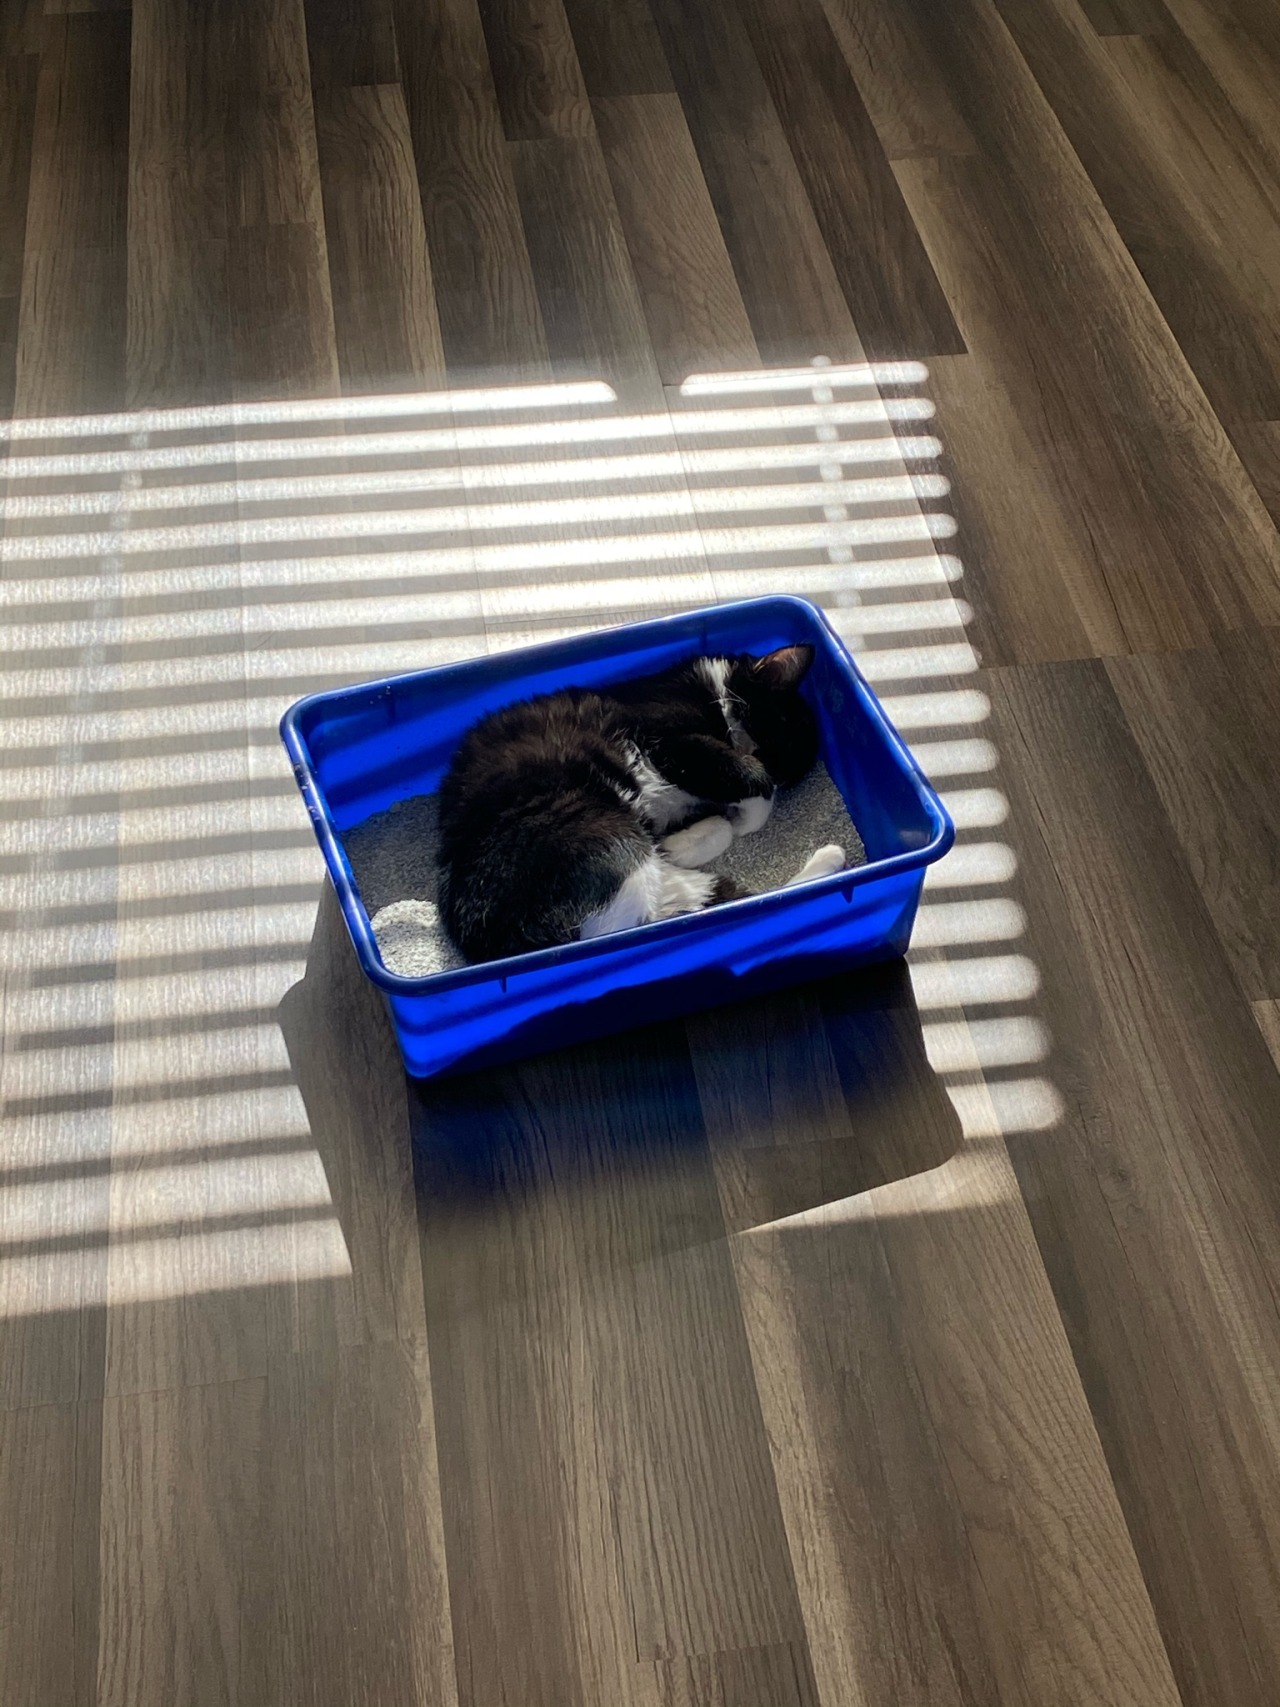 my cat is not only sleeping in her fresh litter box but went ahead & moved it from its spot to be closer to the sun….